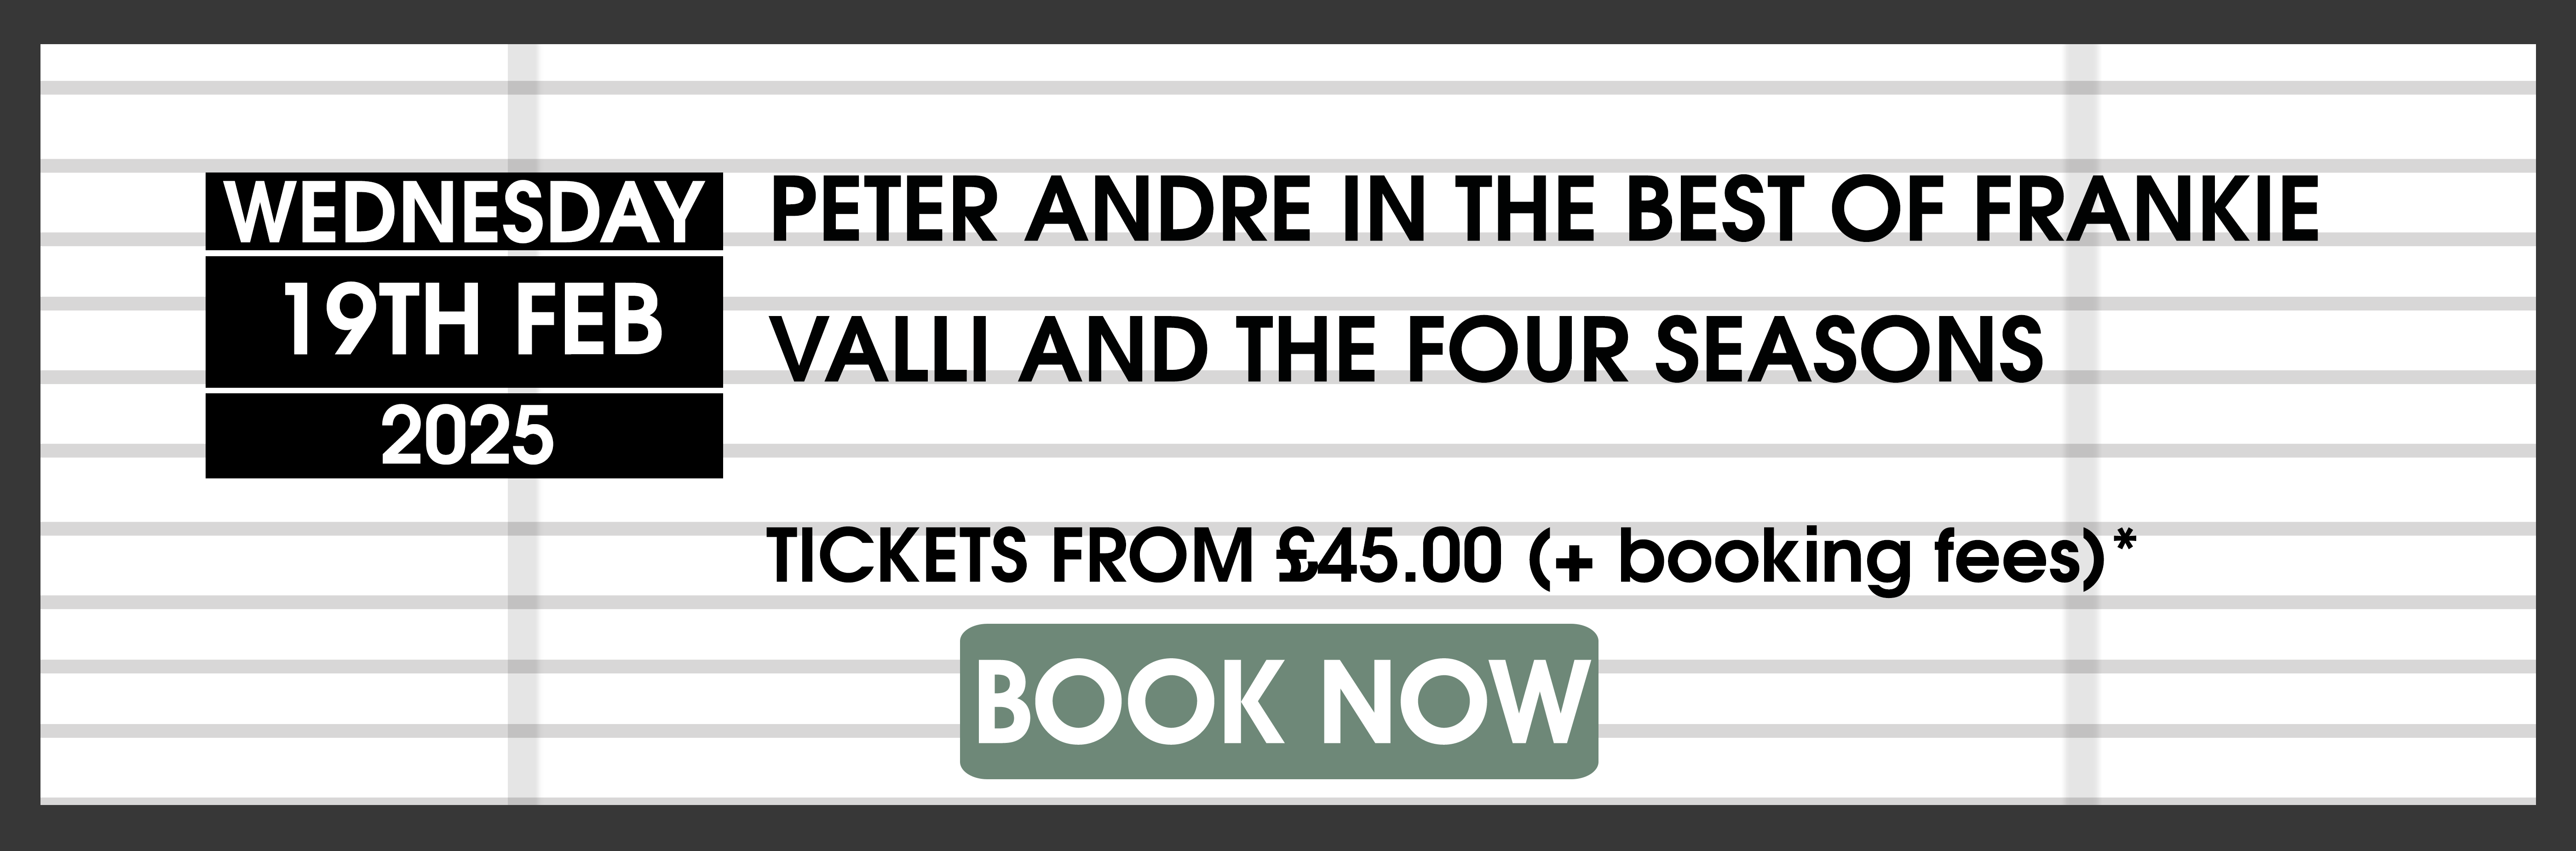 19.02.25 Peter Andre BOOK NOW